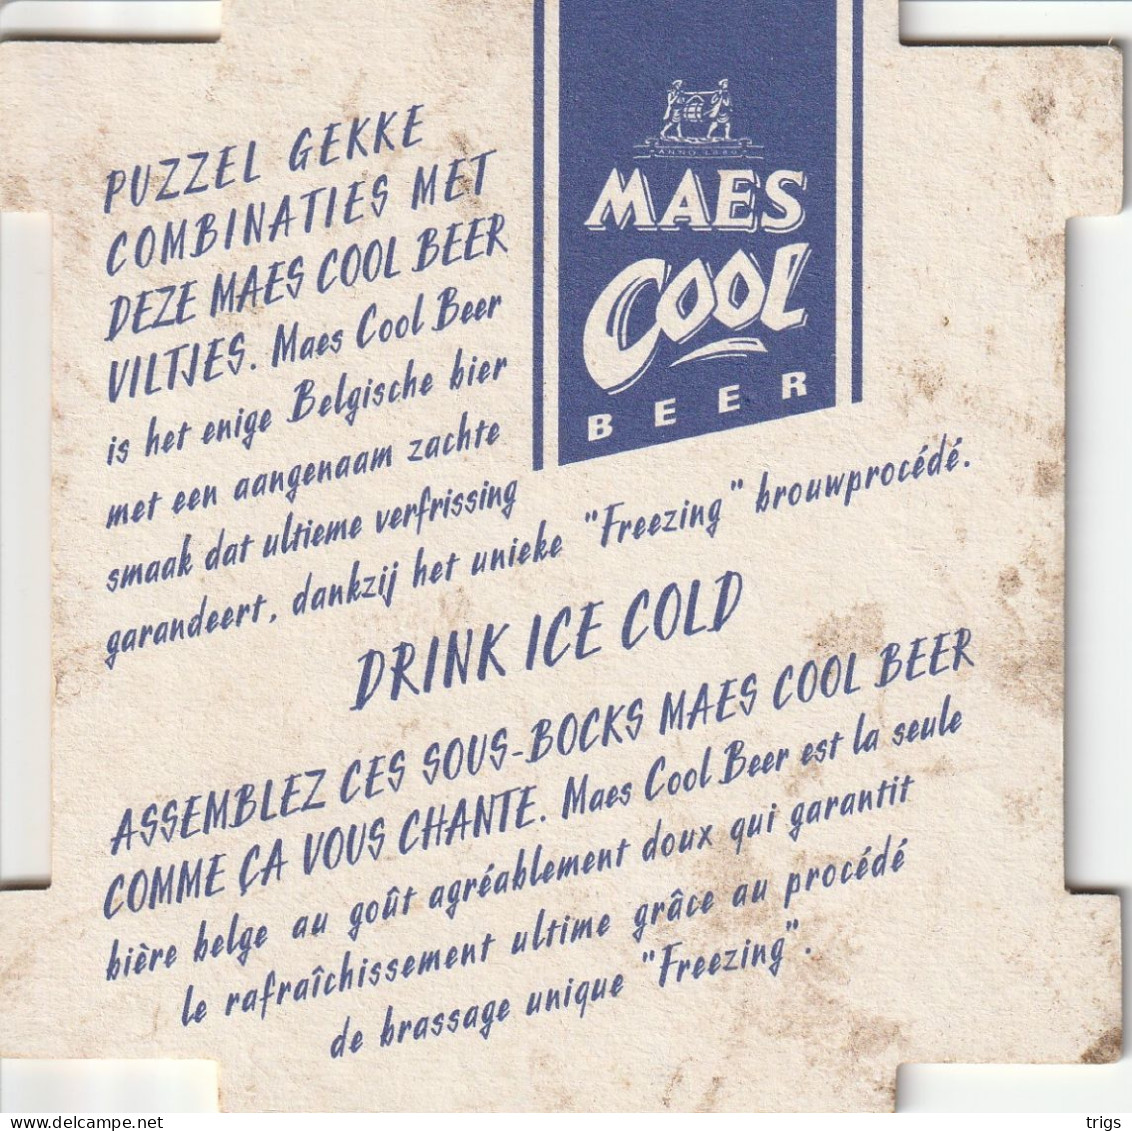 Maes Cool Beer - Sotto-boccale